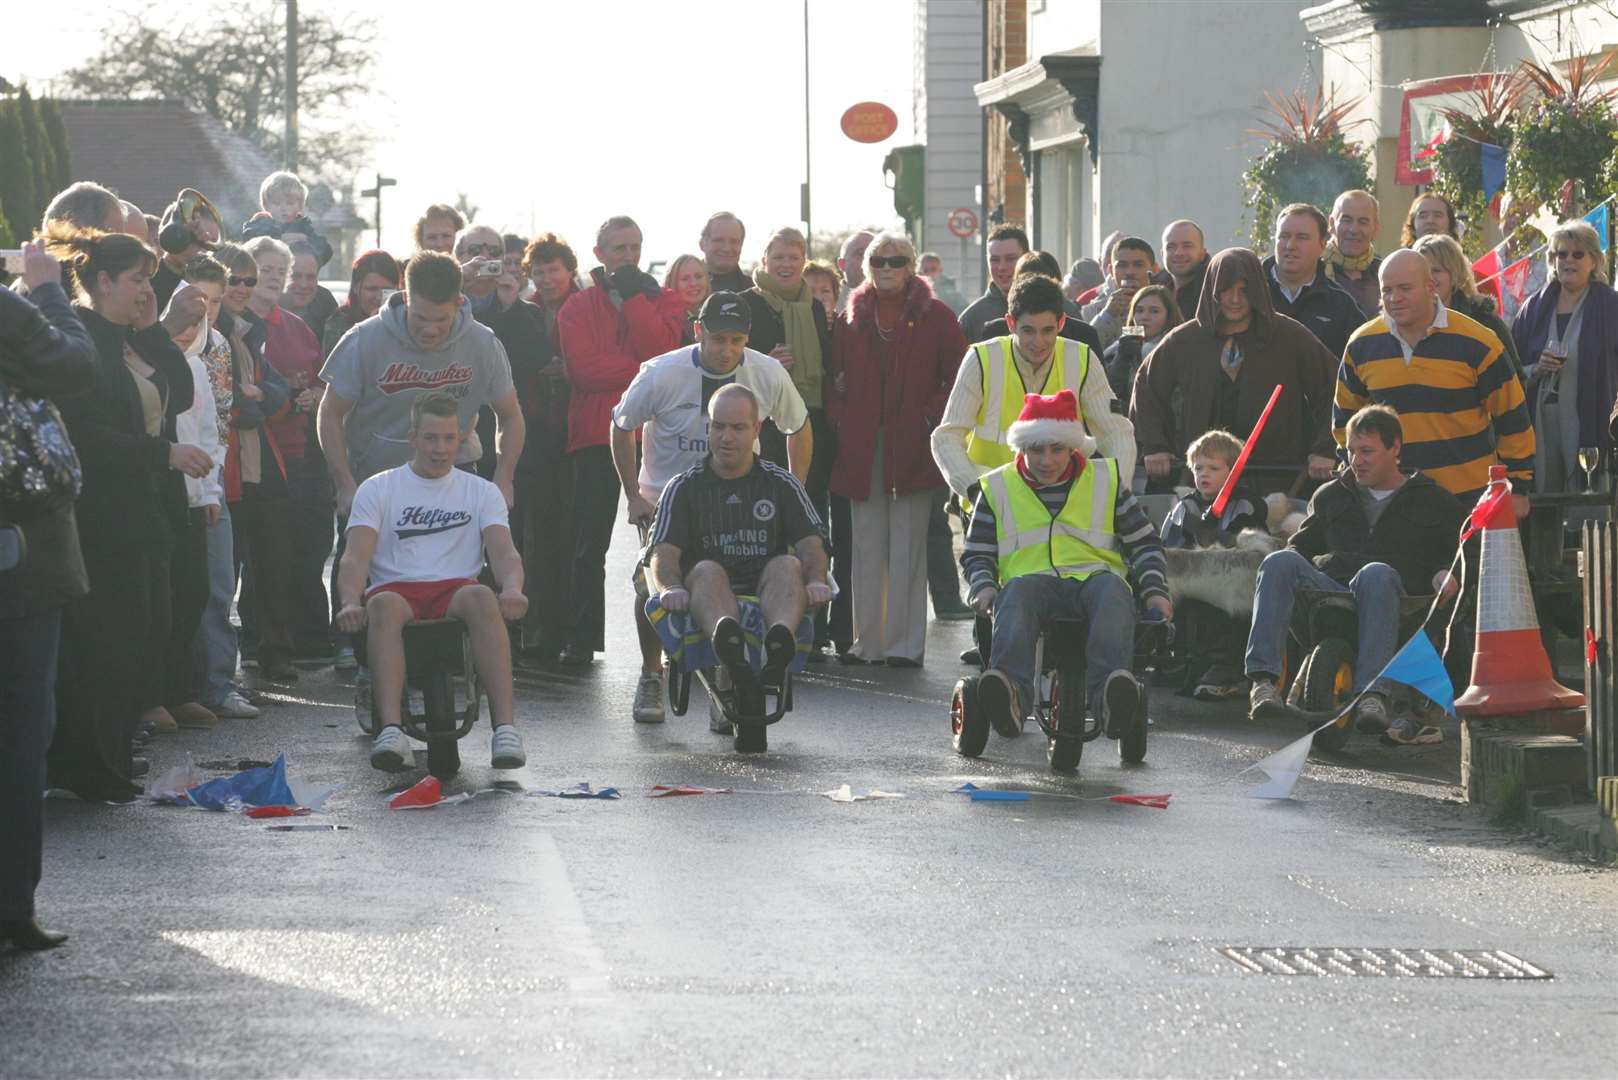 Action from the annual pram and wheelbarrow race in December 2007